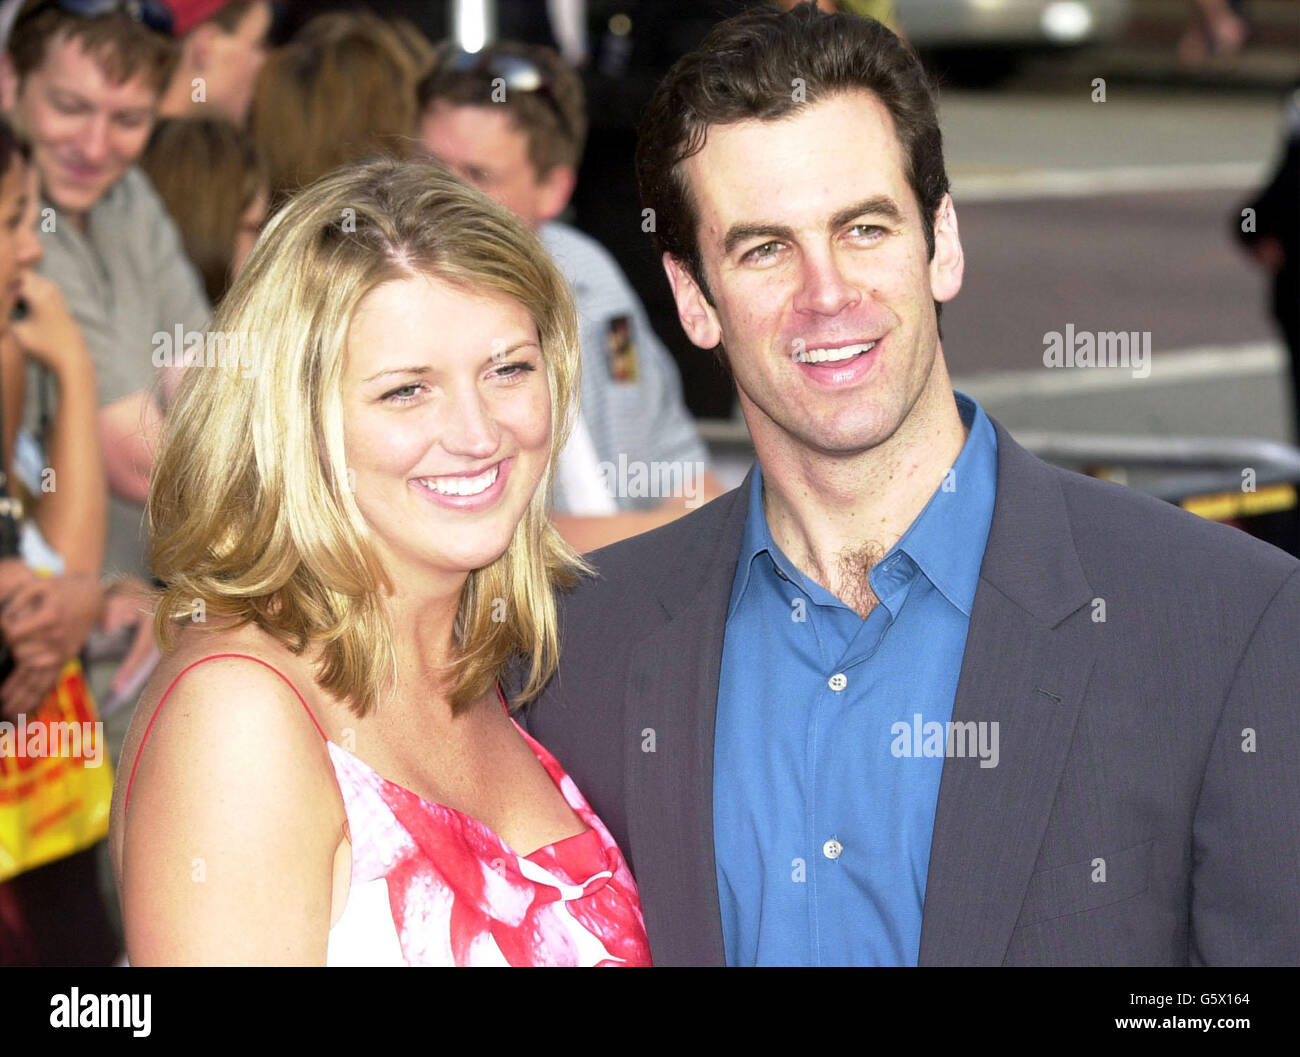 The Bachelor, Alex Michel with his 'fiancee' Laraine Newman arrive to the premiere of The Sum Of All Fears,' in Los Angeles. Stock Photo